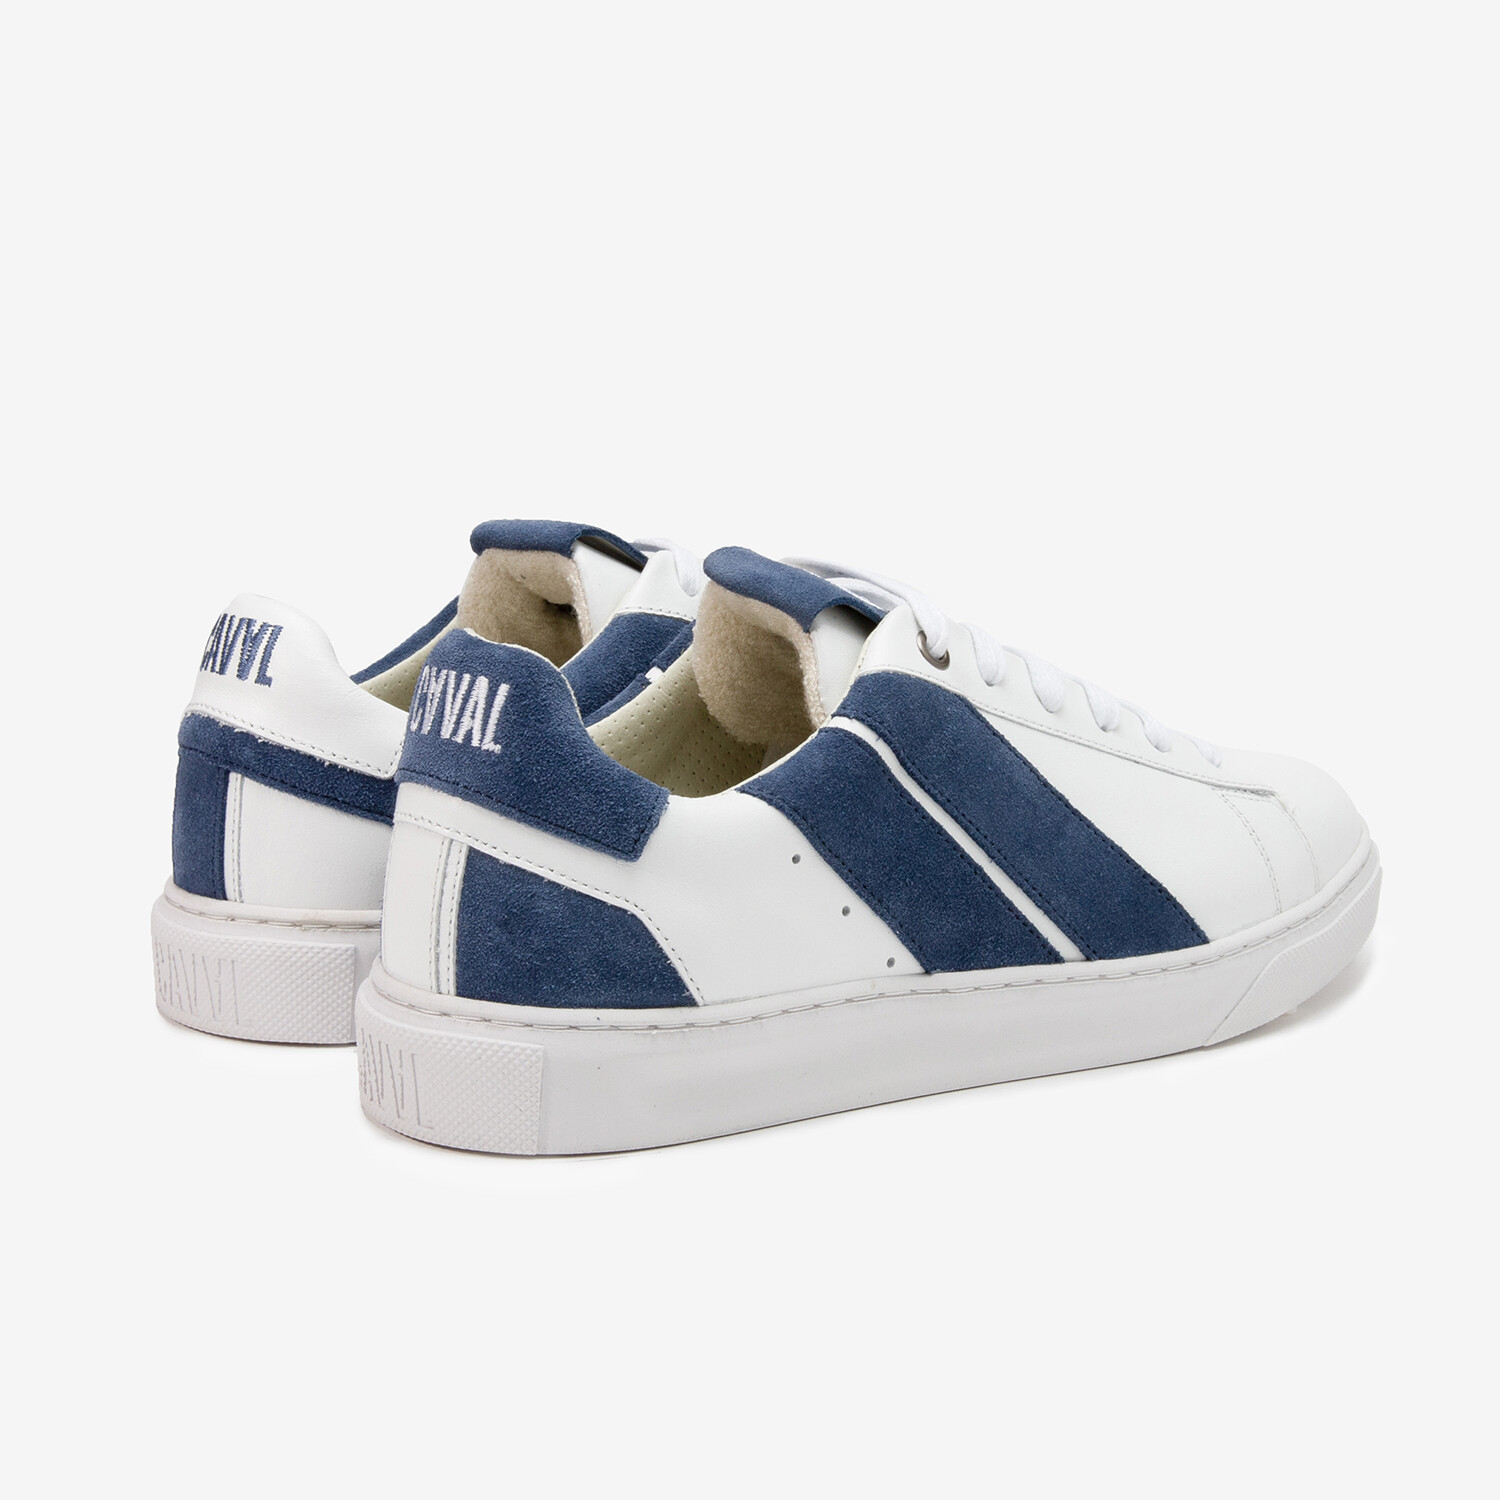 Night Divine Sneaker // Blue (Euro Size 36) - Caval - Touch of Modern